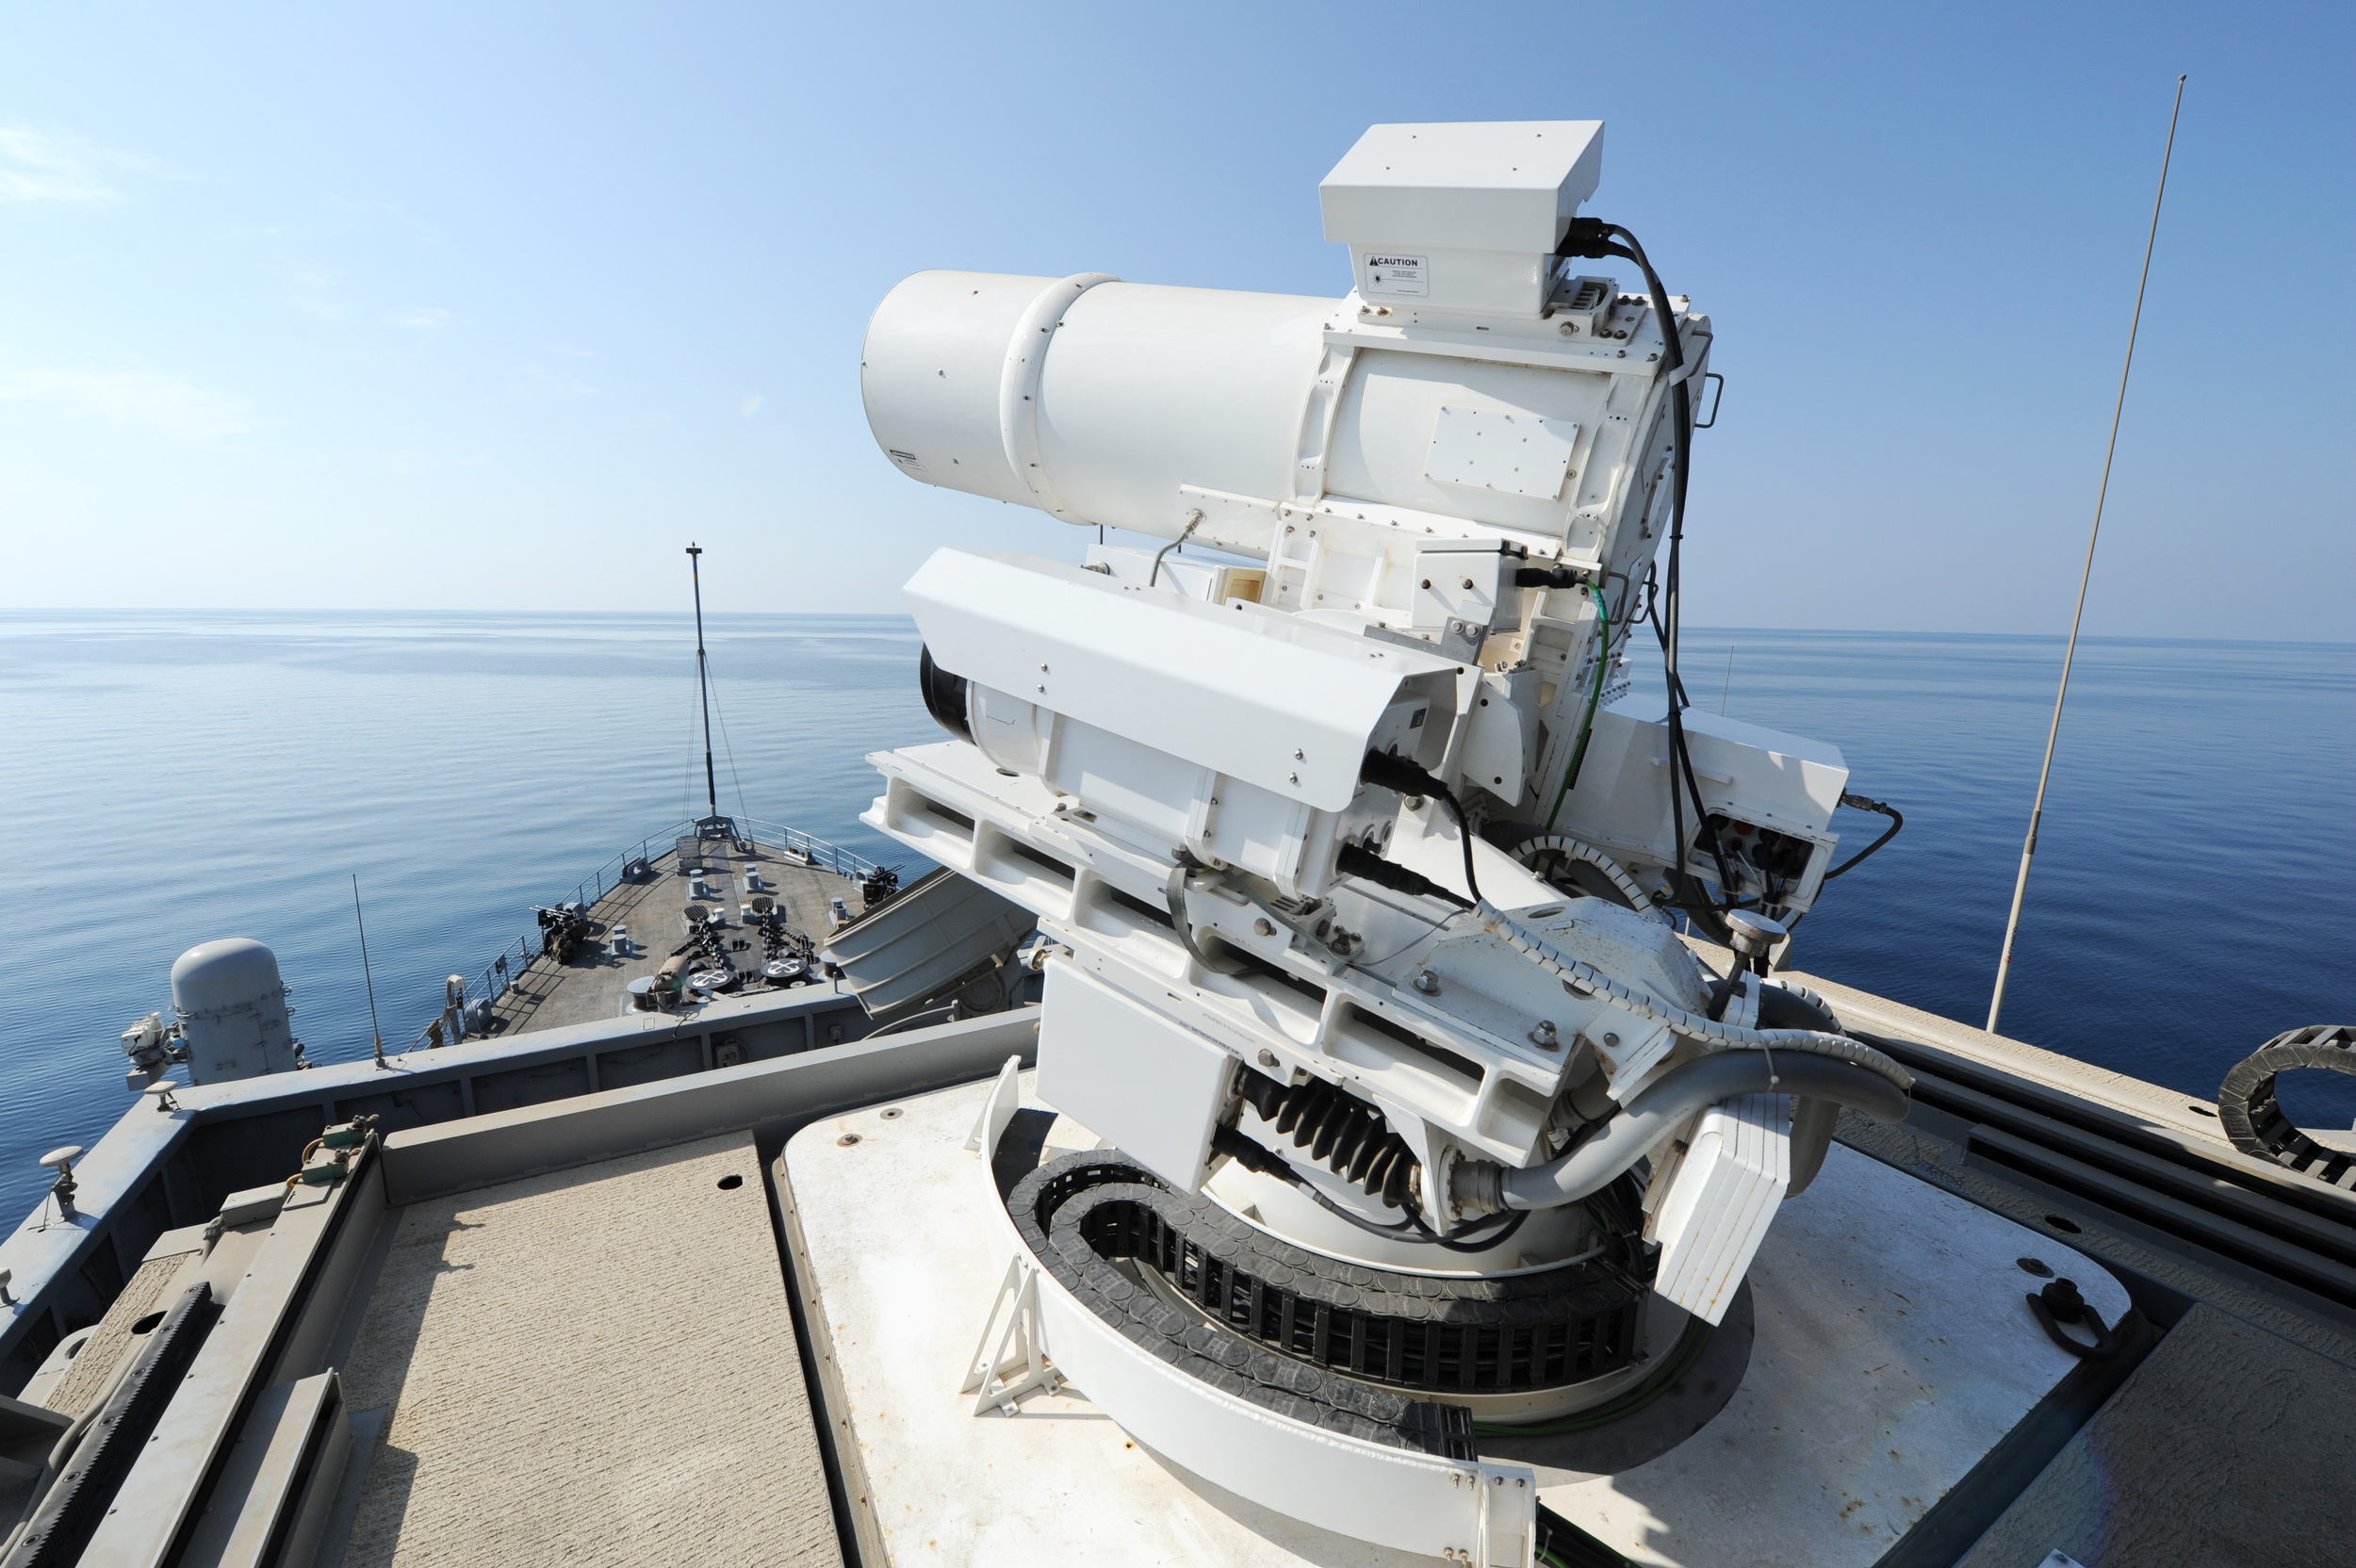   ARABIAN GULF  &nbsp;- The Office of Naval Research (ONR)-sponsored Laser Weapon System (LaWS) performs an operational demonstration aboard the Afloat Forward Staging Base (Interim) USS Ponce (ASB(I) 15)&nbsp;while deployed to the Arabian Gulf.&nbsp